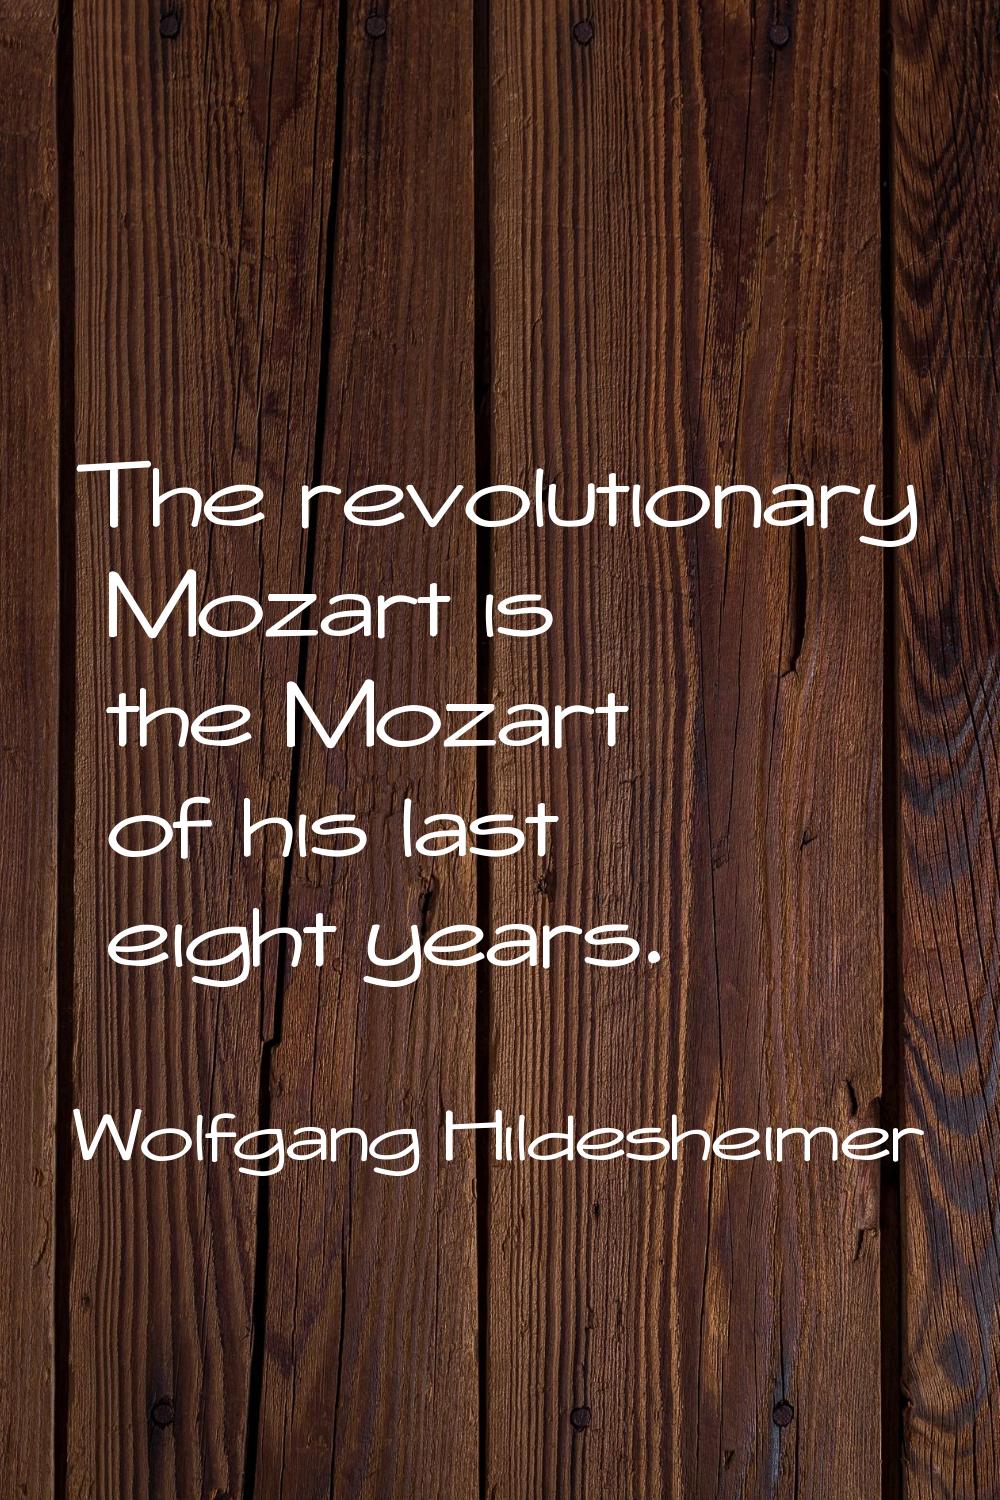 The revolutionary Mozart is the Mozart of his last eight years.